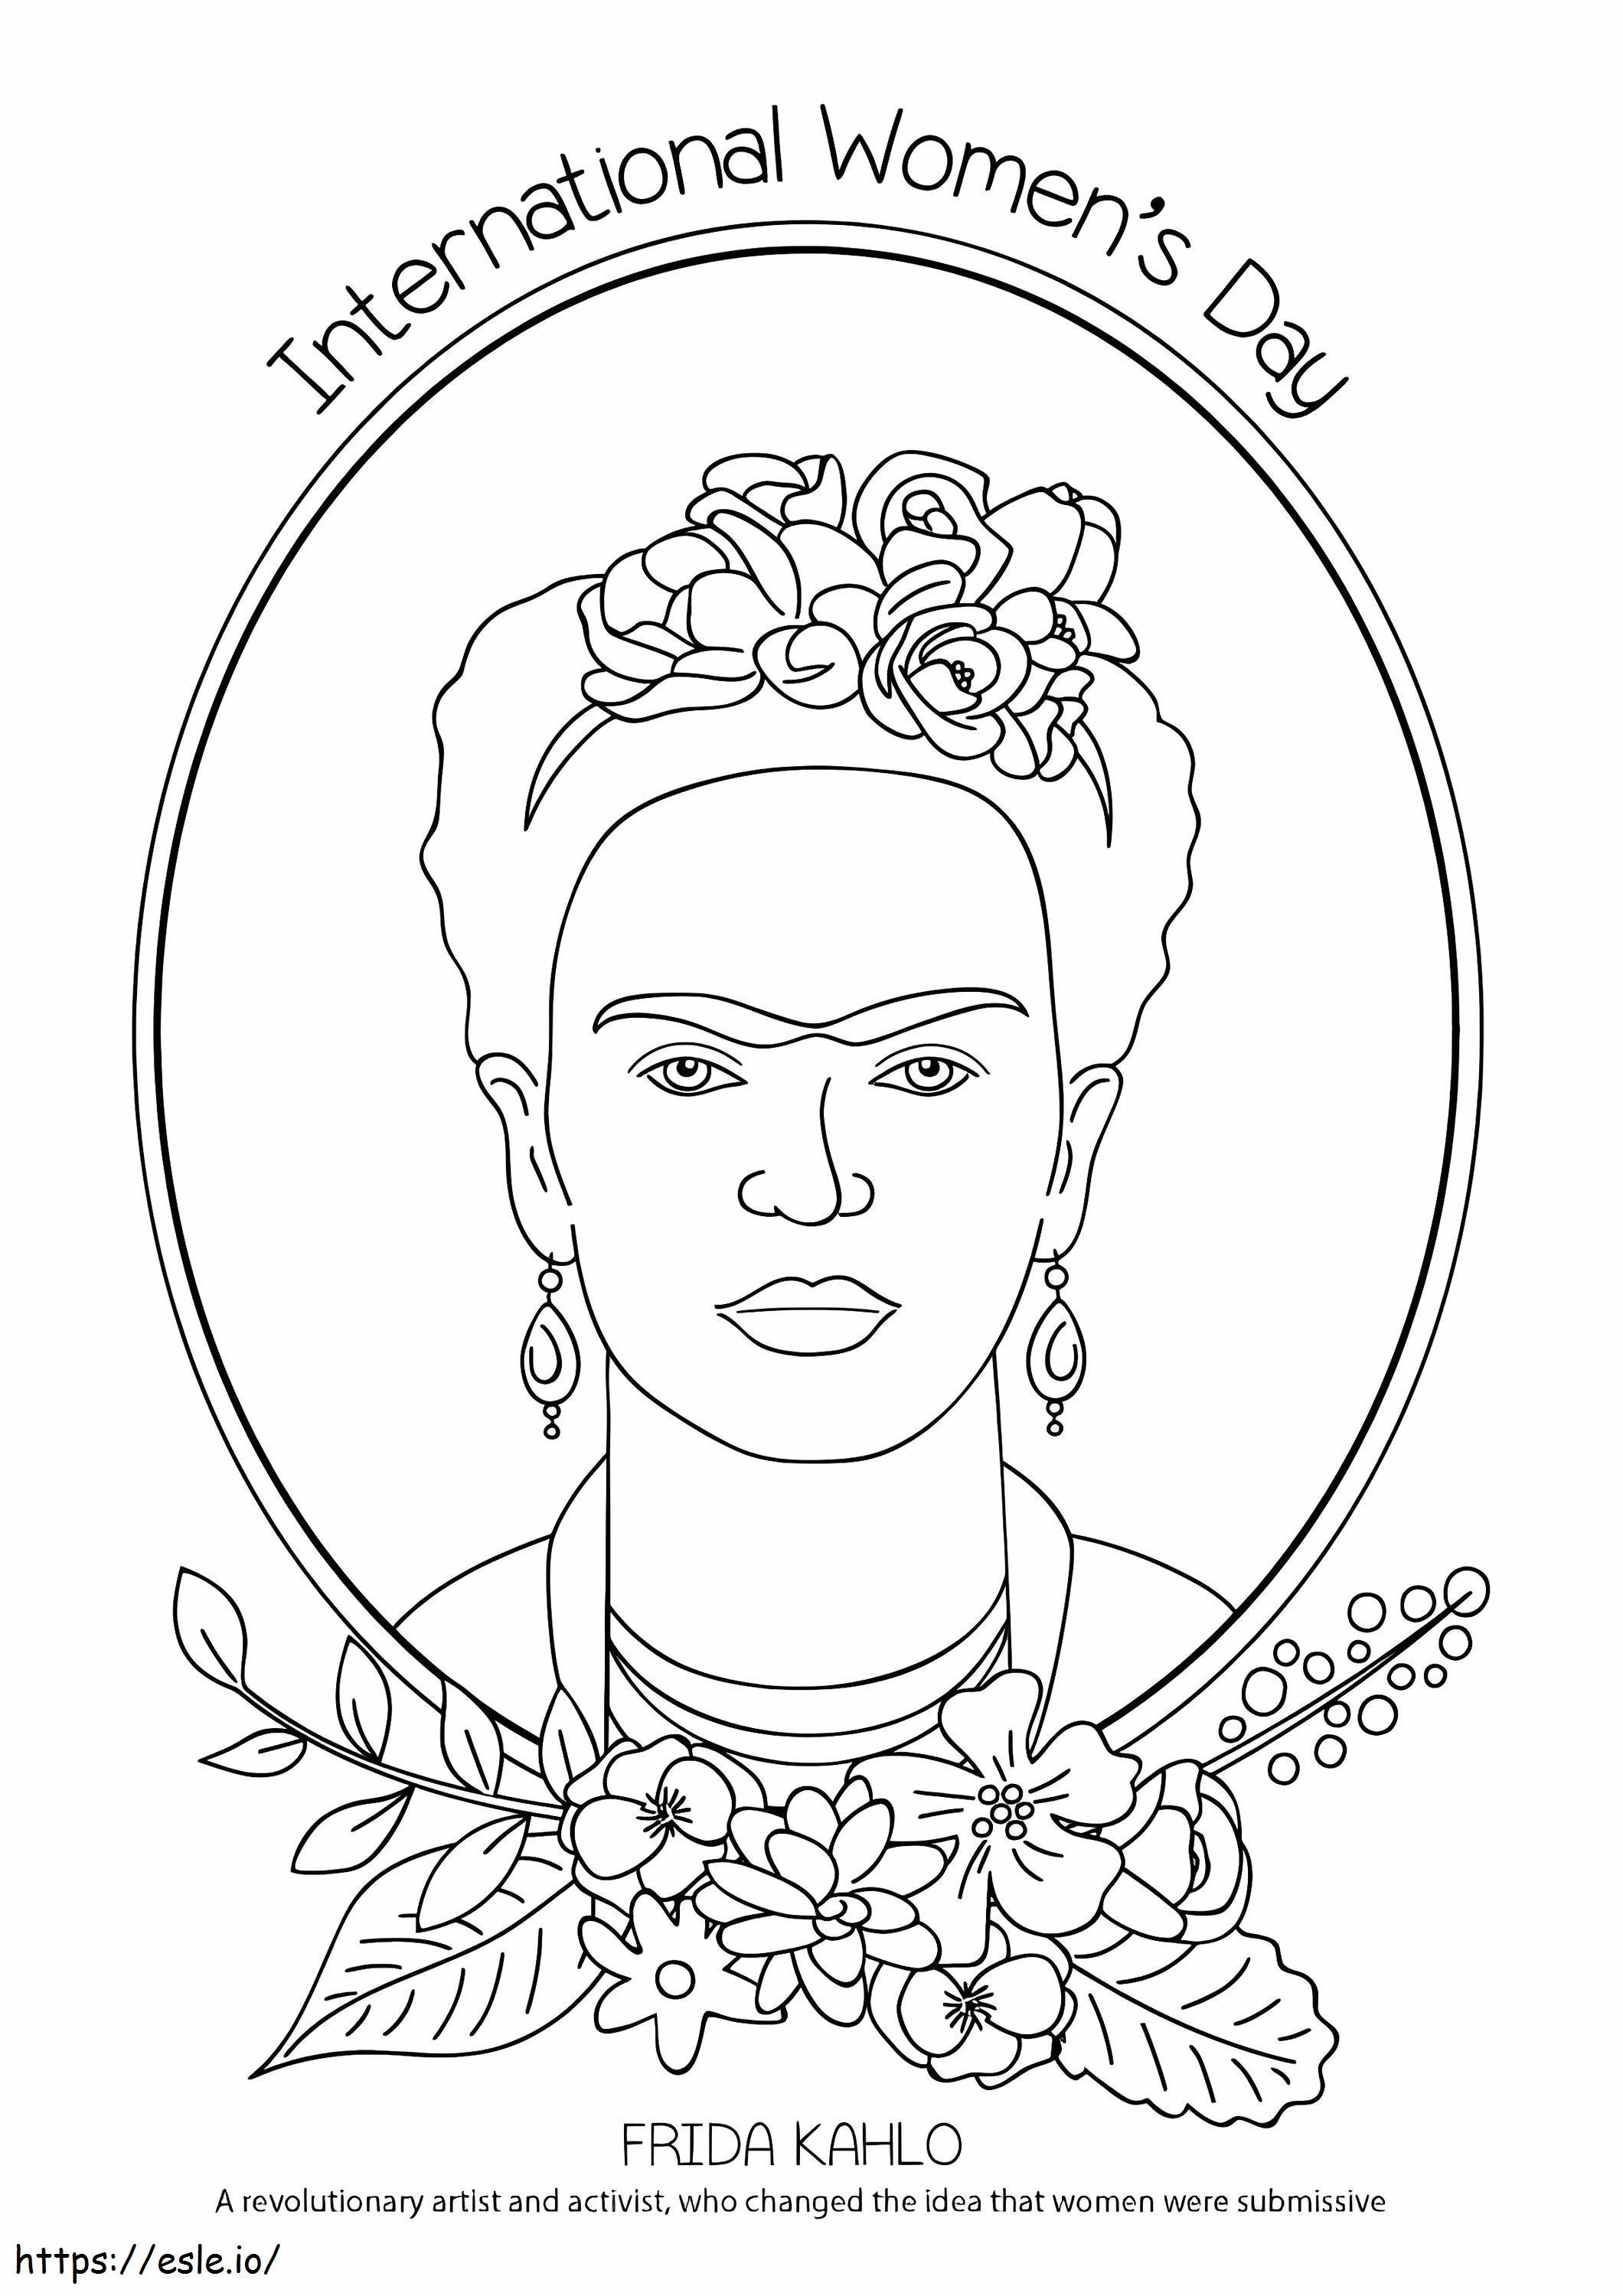 International Womens Day coloring page